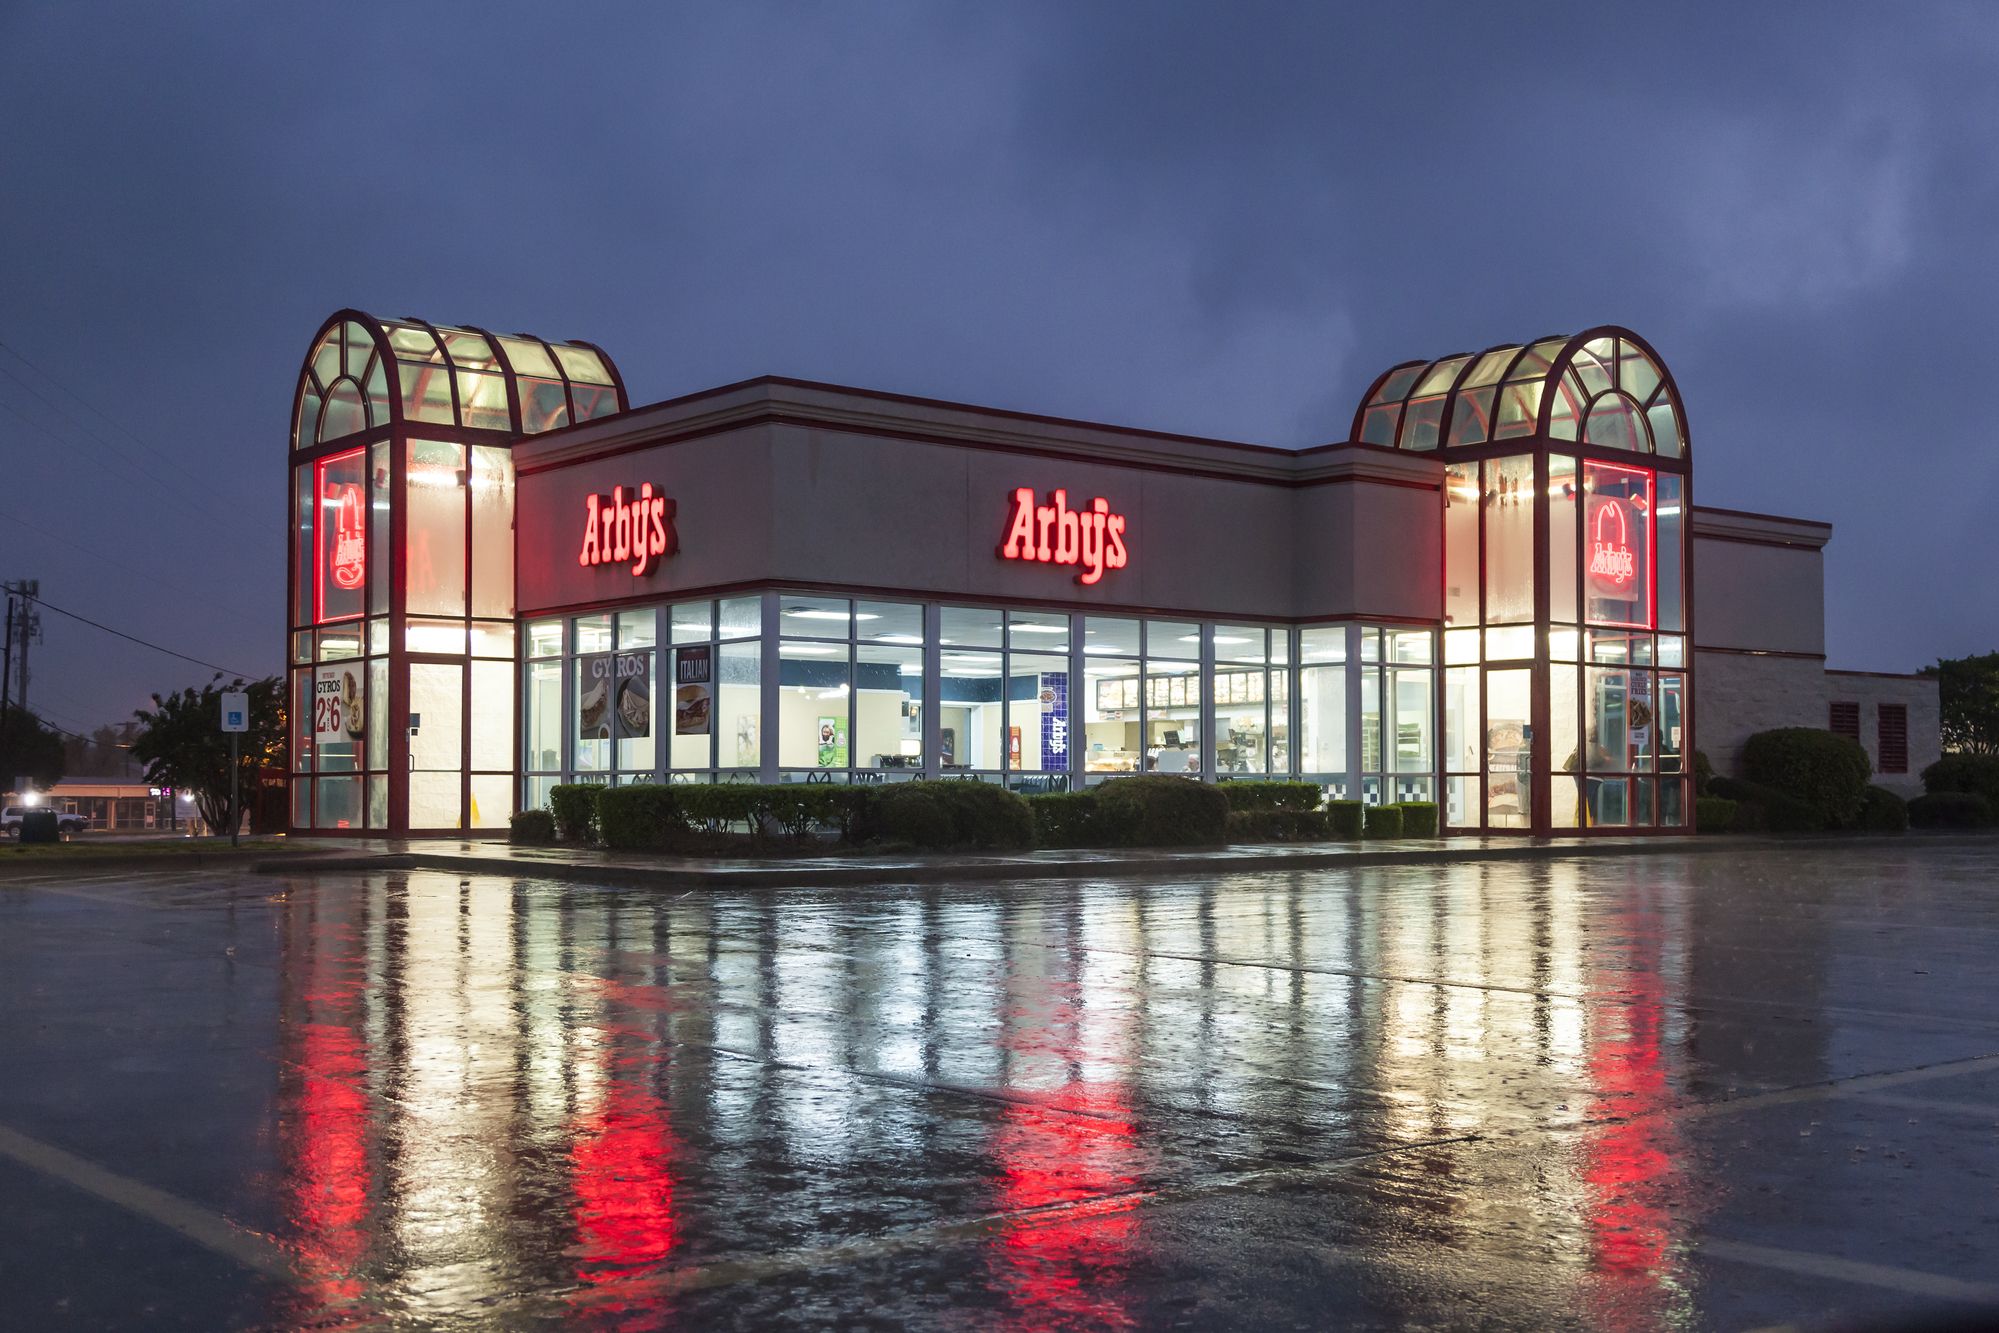 DALLAS, Tx, USA - APR 17, 2016: Arby's restaurant building illuminated at night. Arby's is the second largest sandwich chain in the U.S. with more than 3,400 restaurants